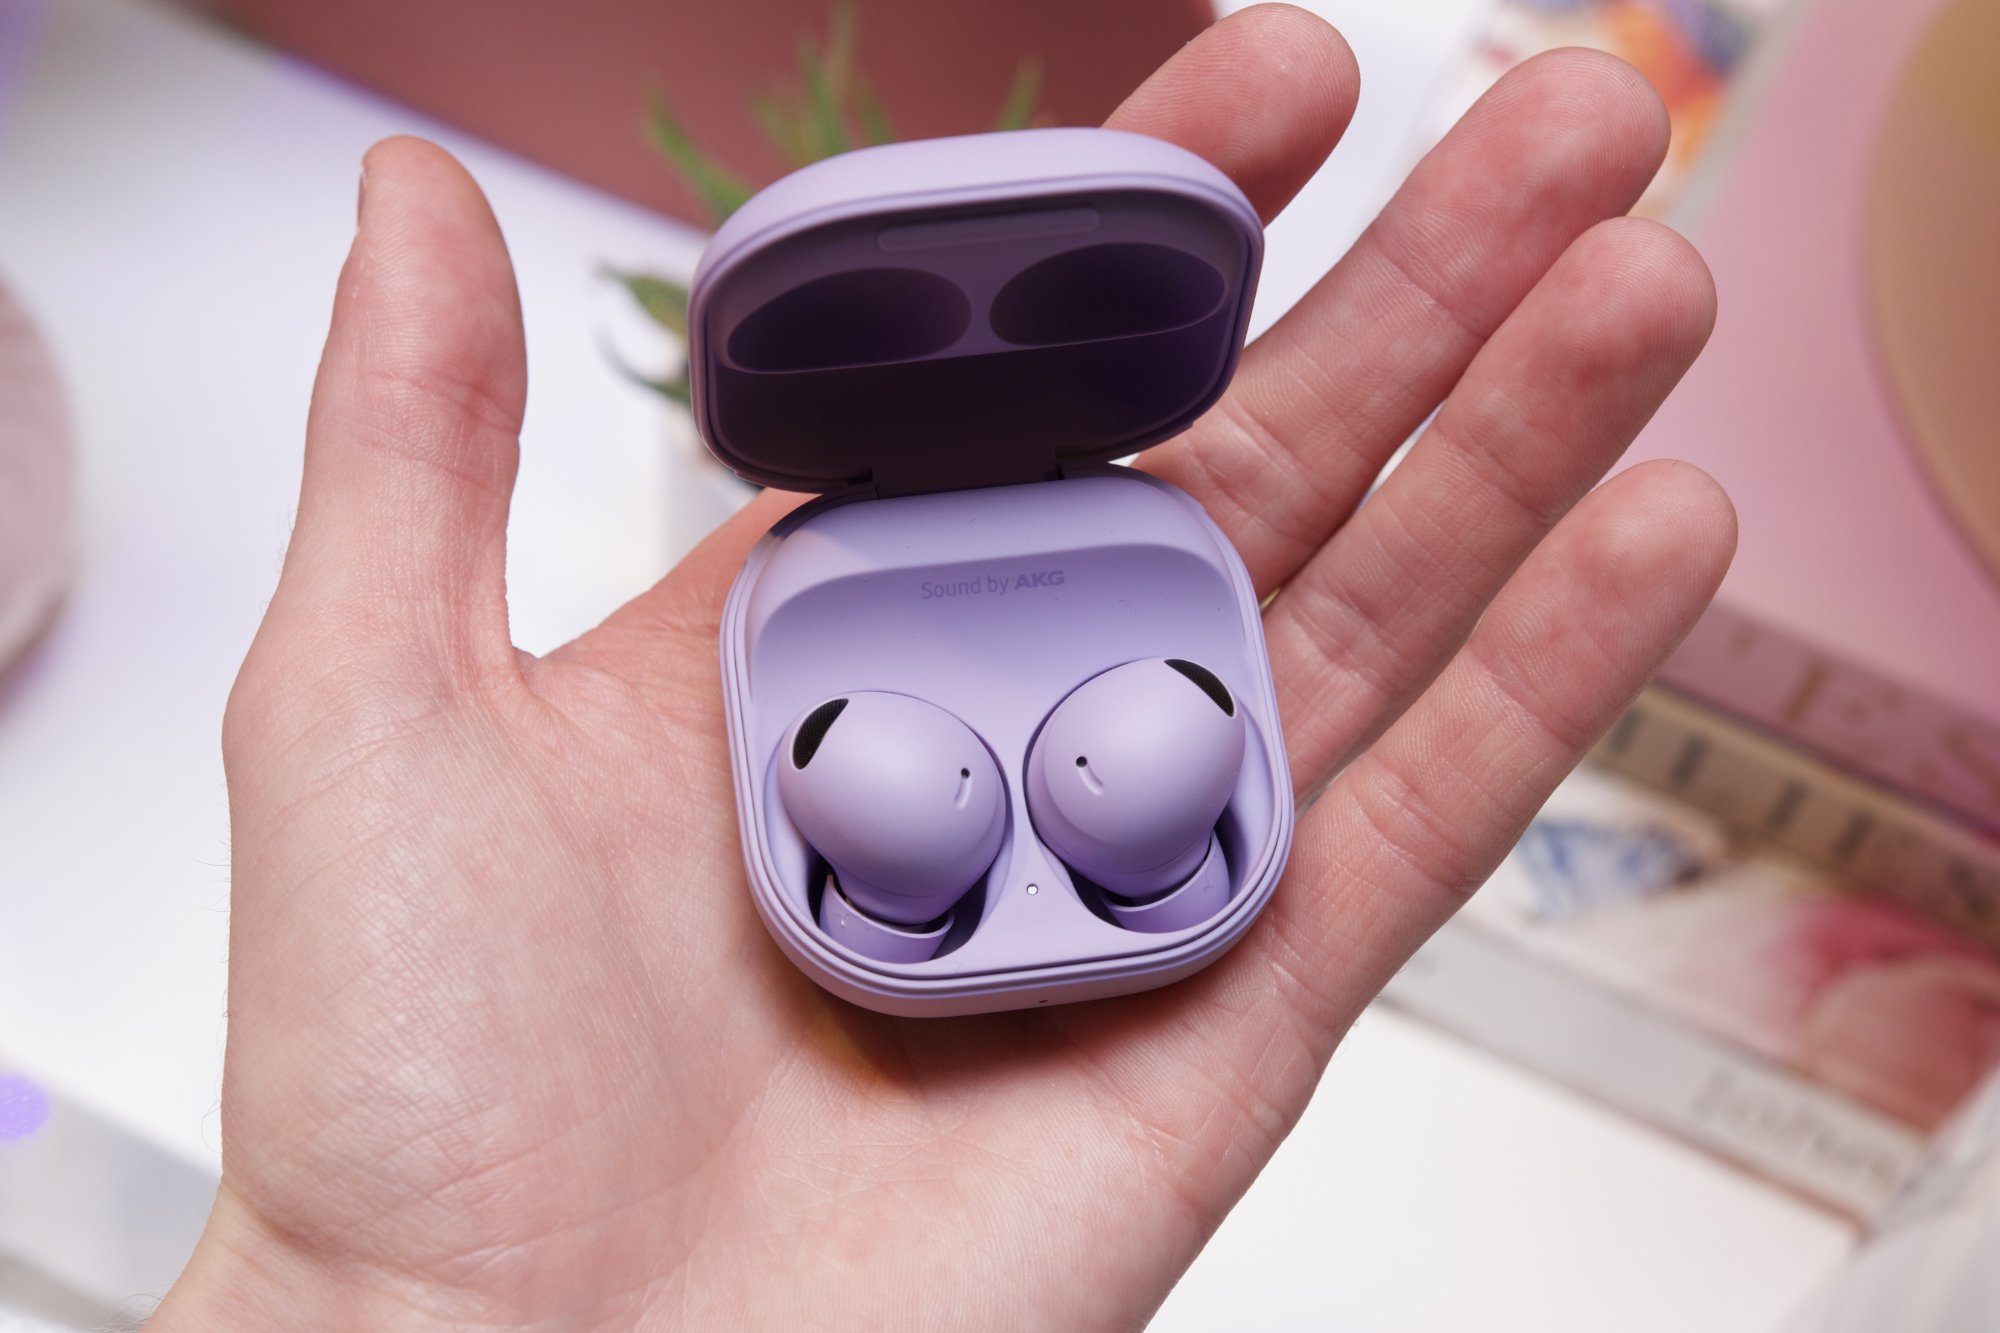 The Galaxy Buds 2 Pro look like the Samsung earbuds we’ve been waiting for